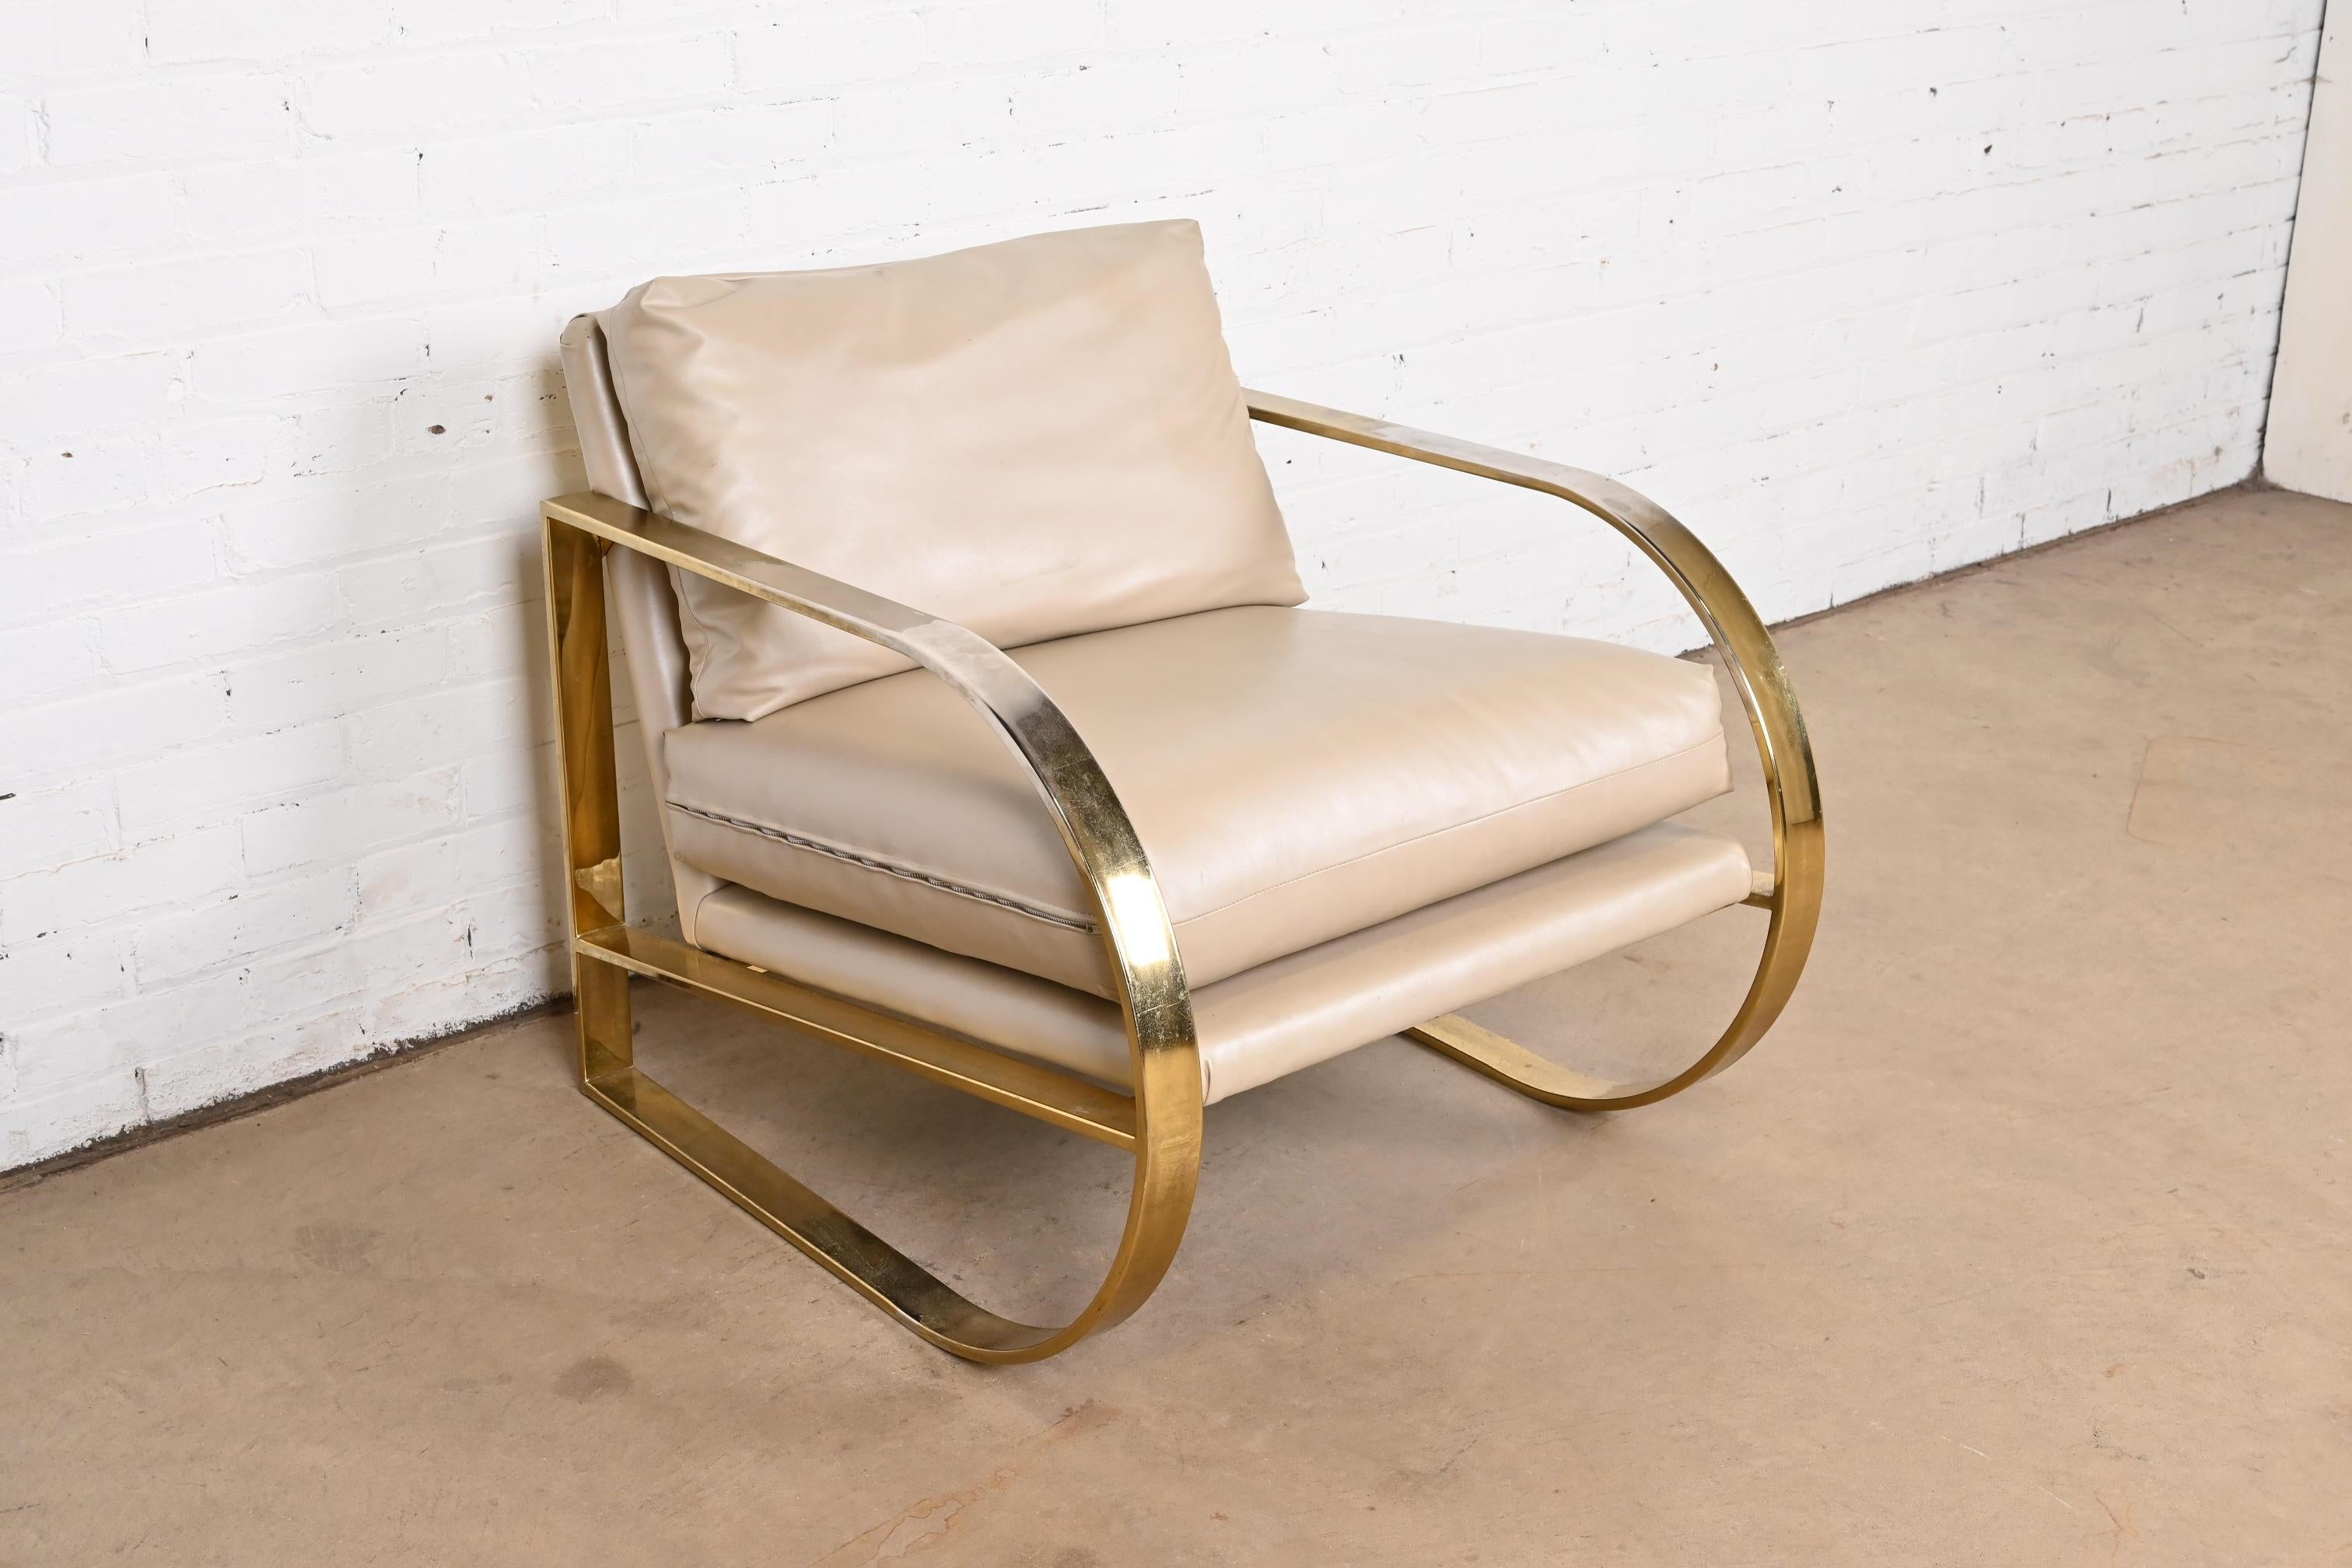 Late 20th Century John Mascheroni for Swaim Originals Brass and Leather Lounge Chair For Sale